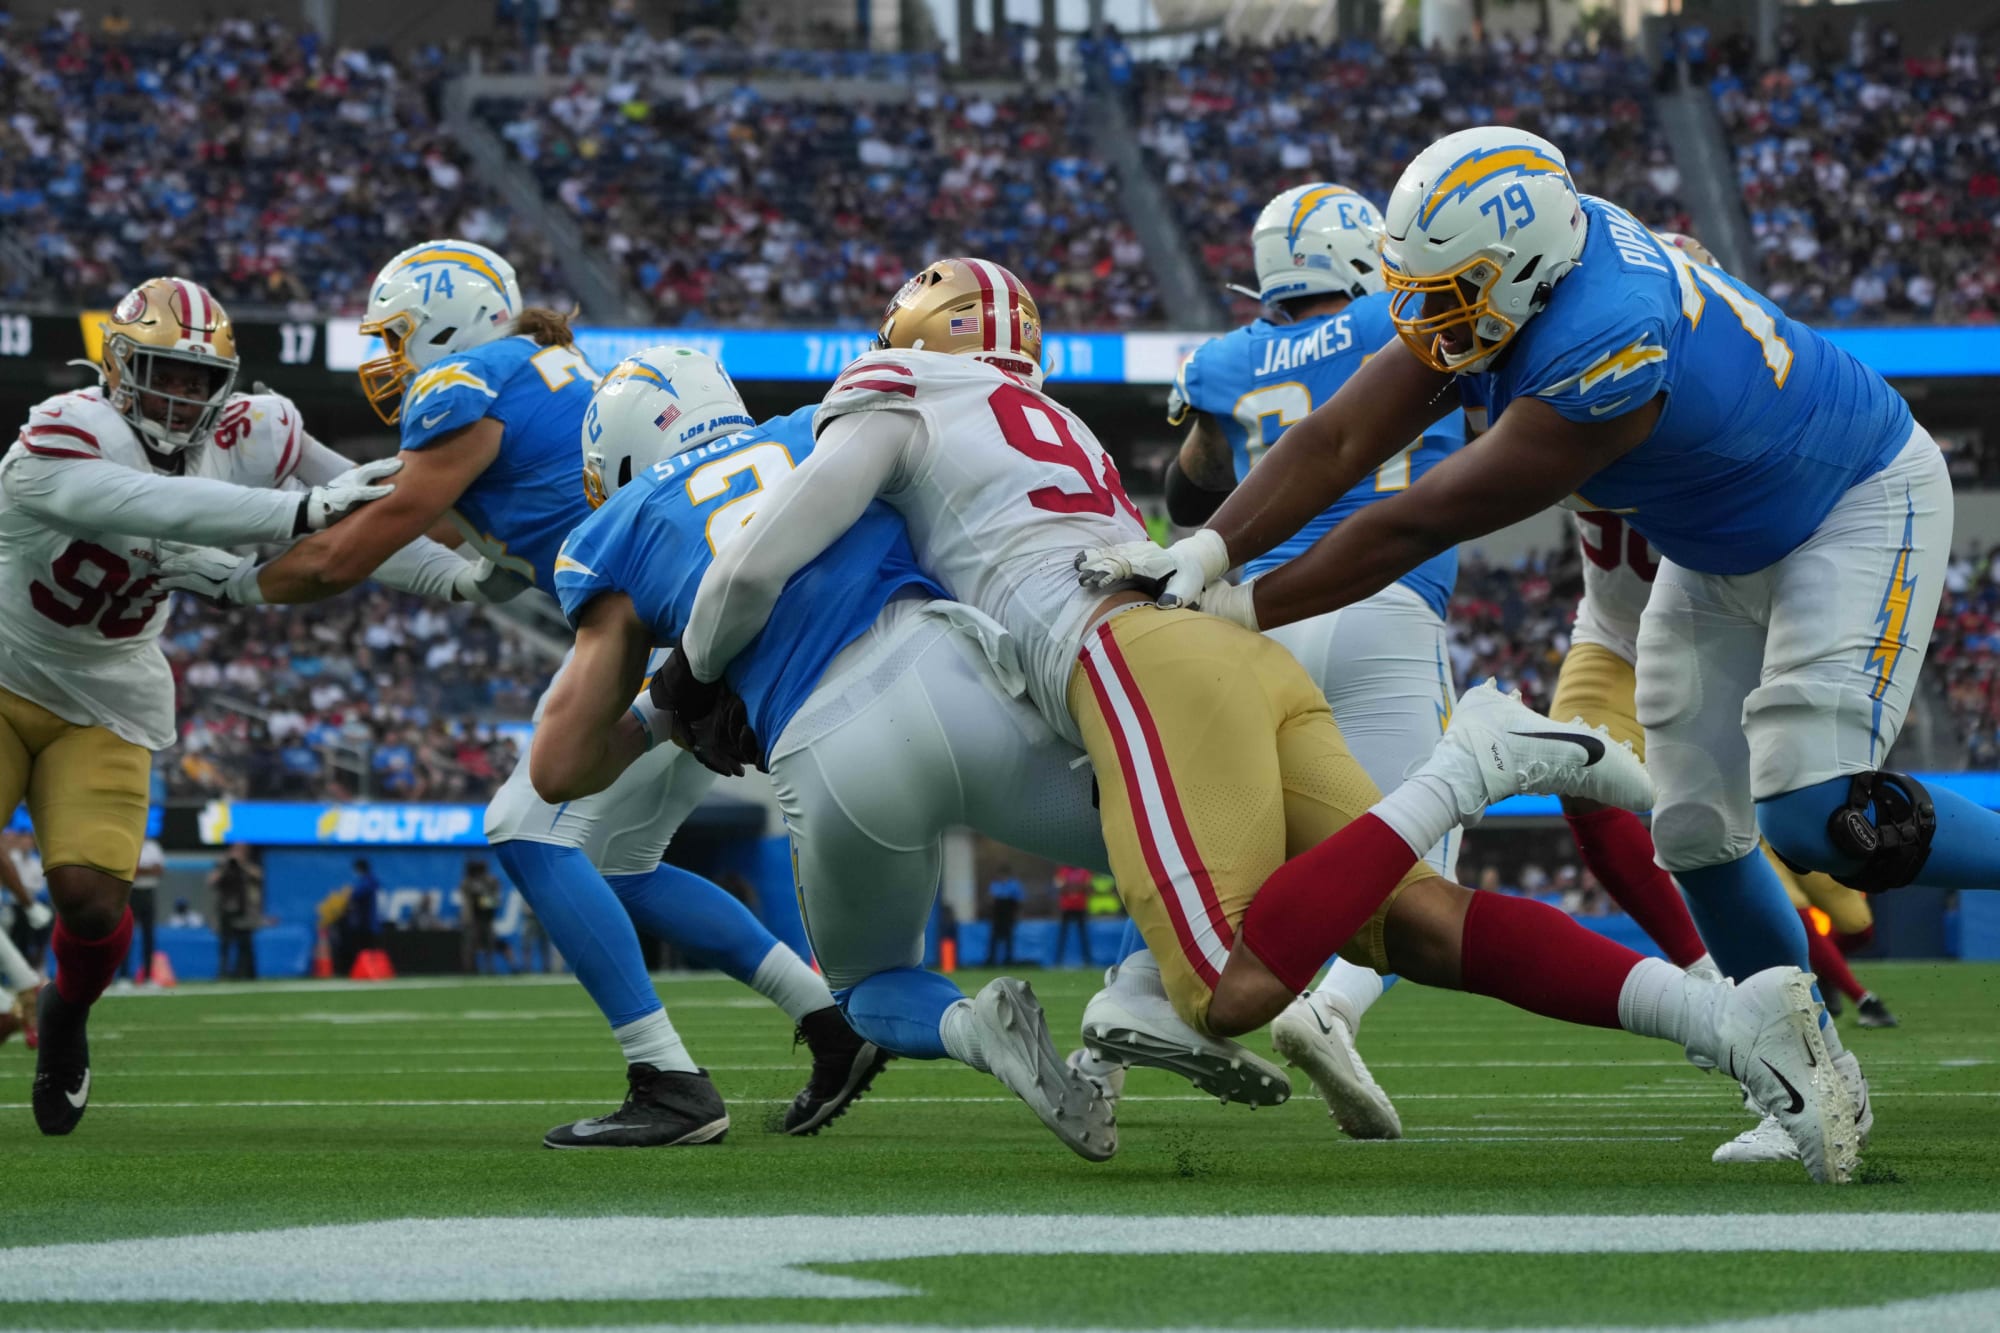 49ers score first on Jordan Willis safety vs. Chargers